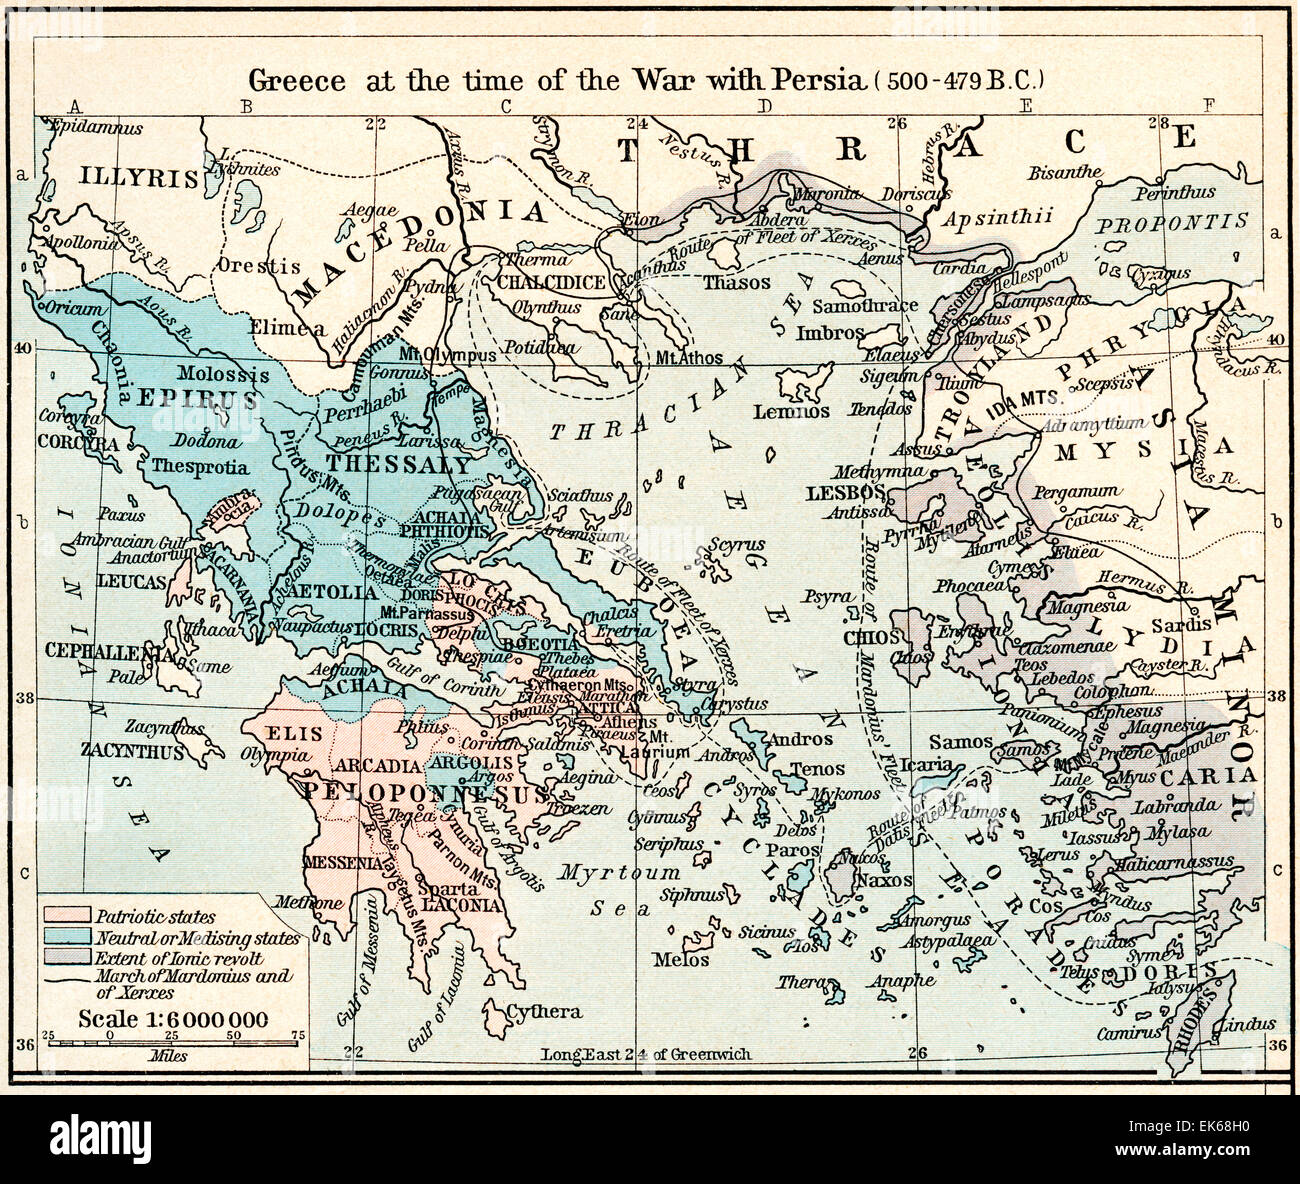 Map of Greece at the time of the war with Persia, 500 - 479 B.C.  The Athenian Empire at its height. Stock Photo